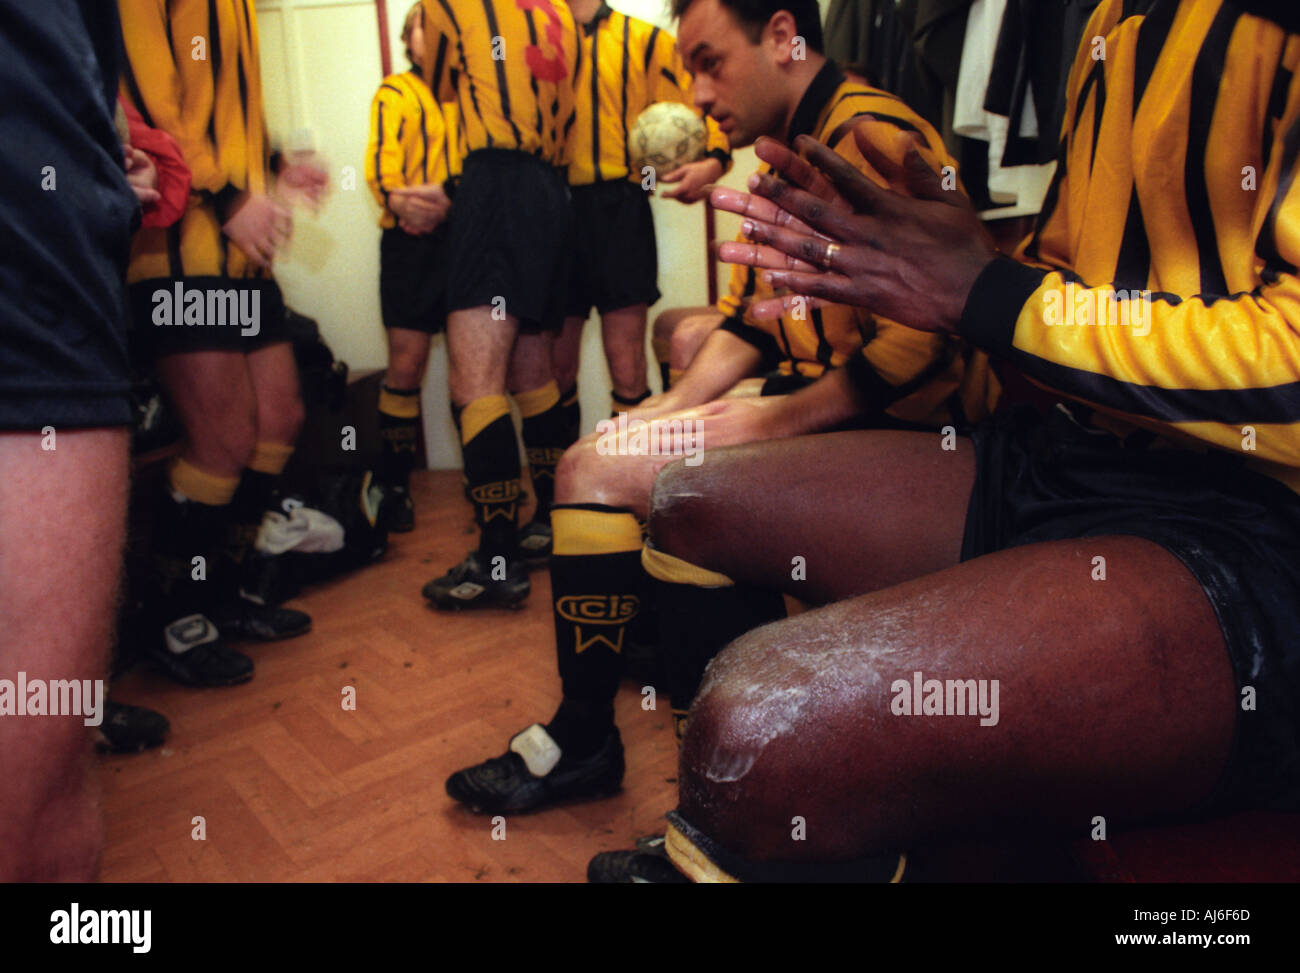 a cup 3rd round qualify bashley thatcham Bashleys dressing room a players knee is covered in vasaline before kick off fina Stock Photo